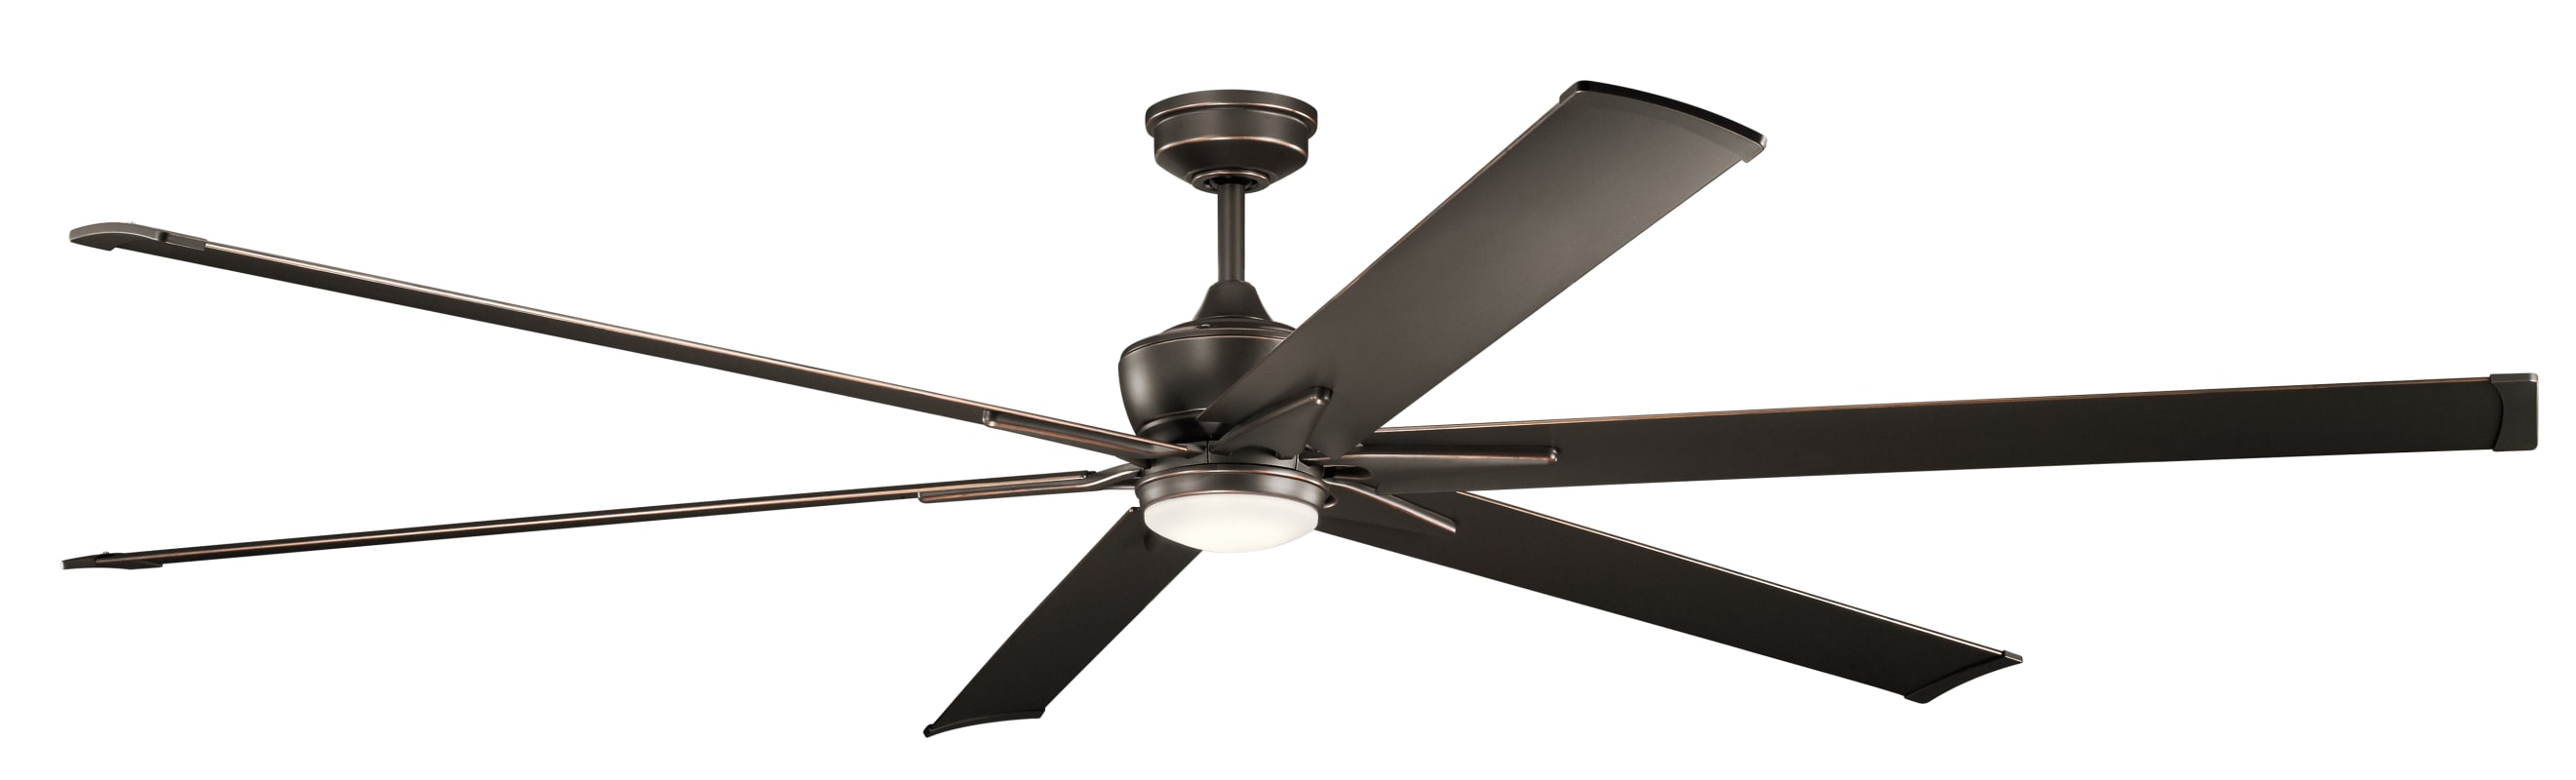 Kichler 300302OZ Olde Bronze 96" Outdoor Ceiling Fan with Blades ...